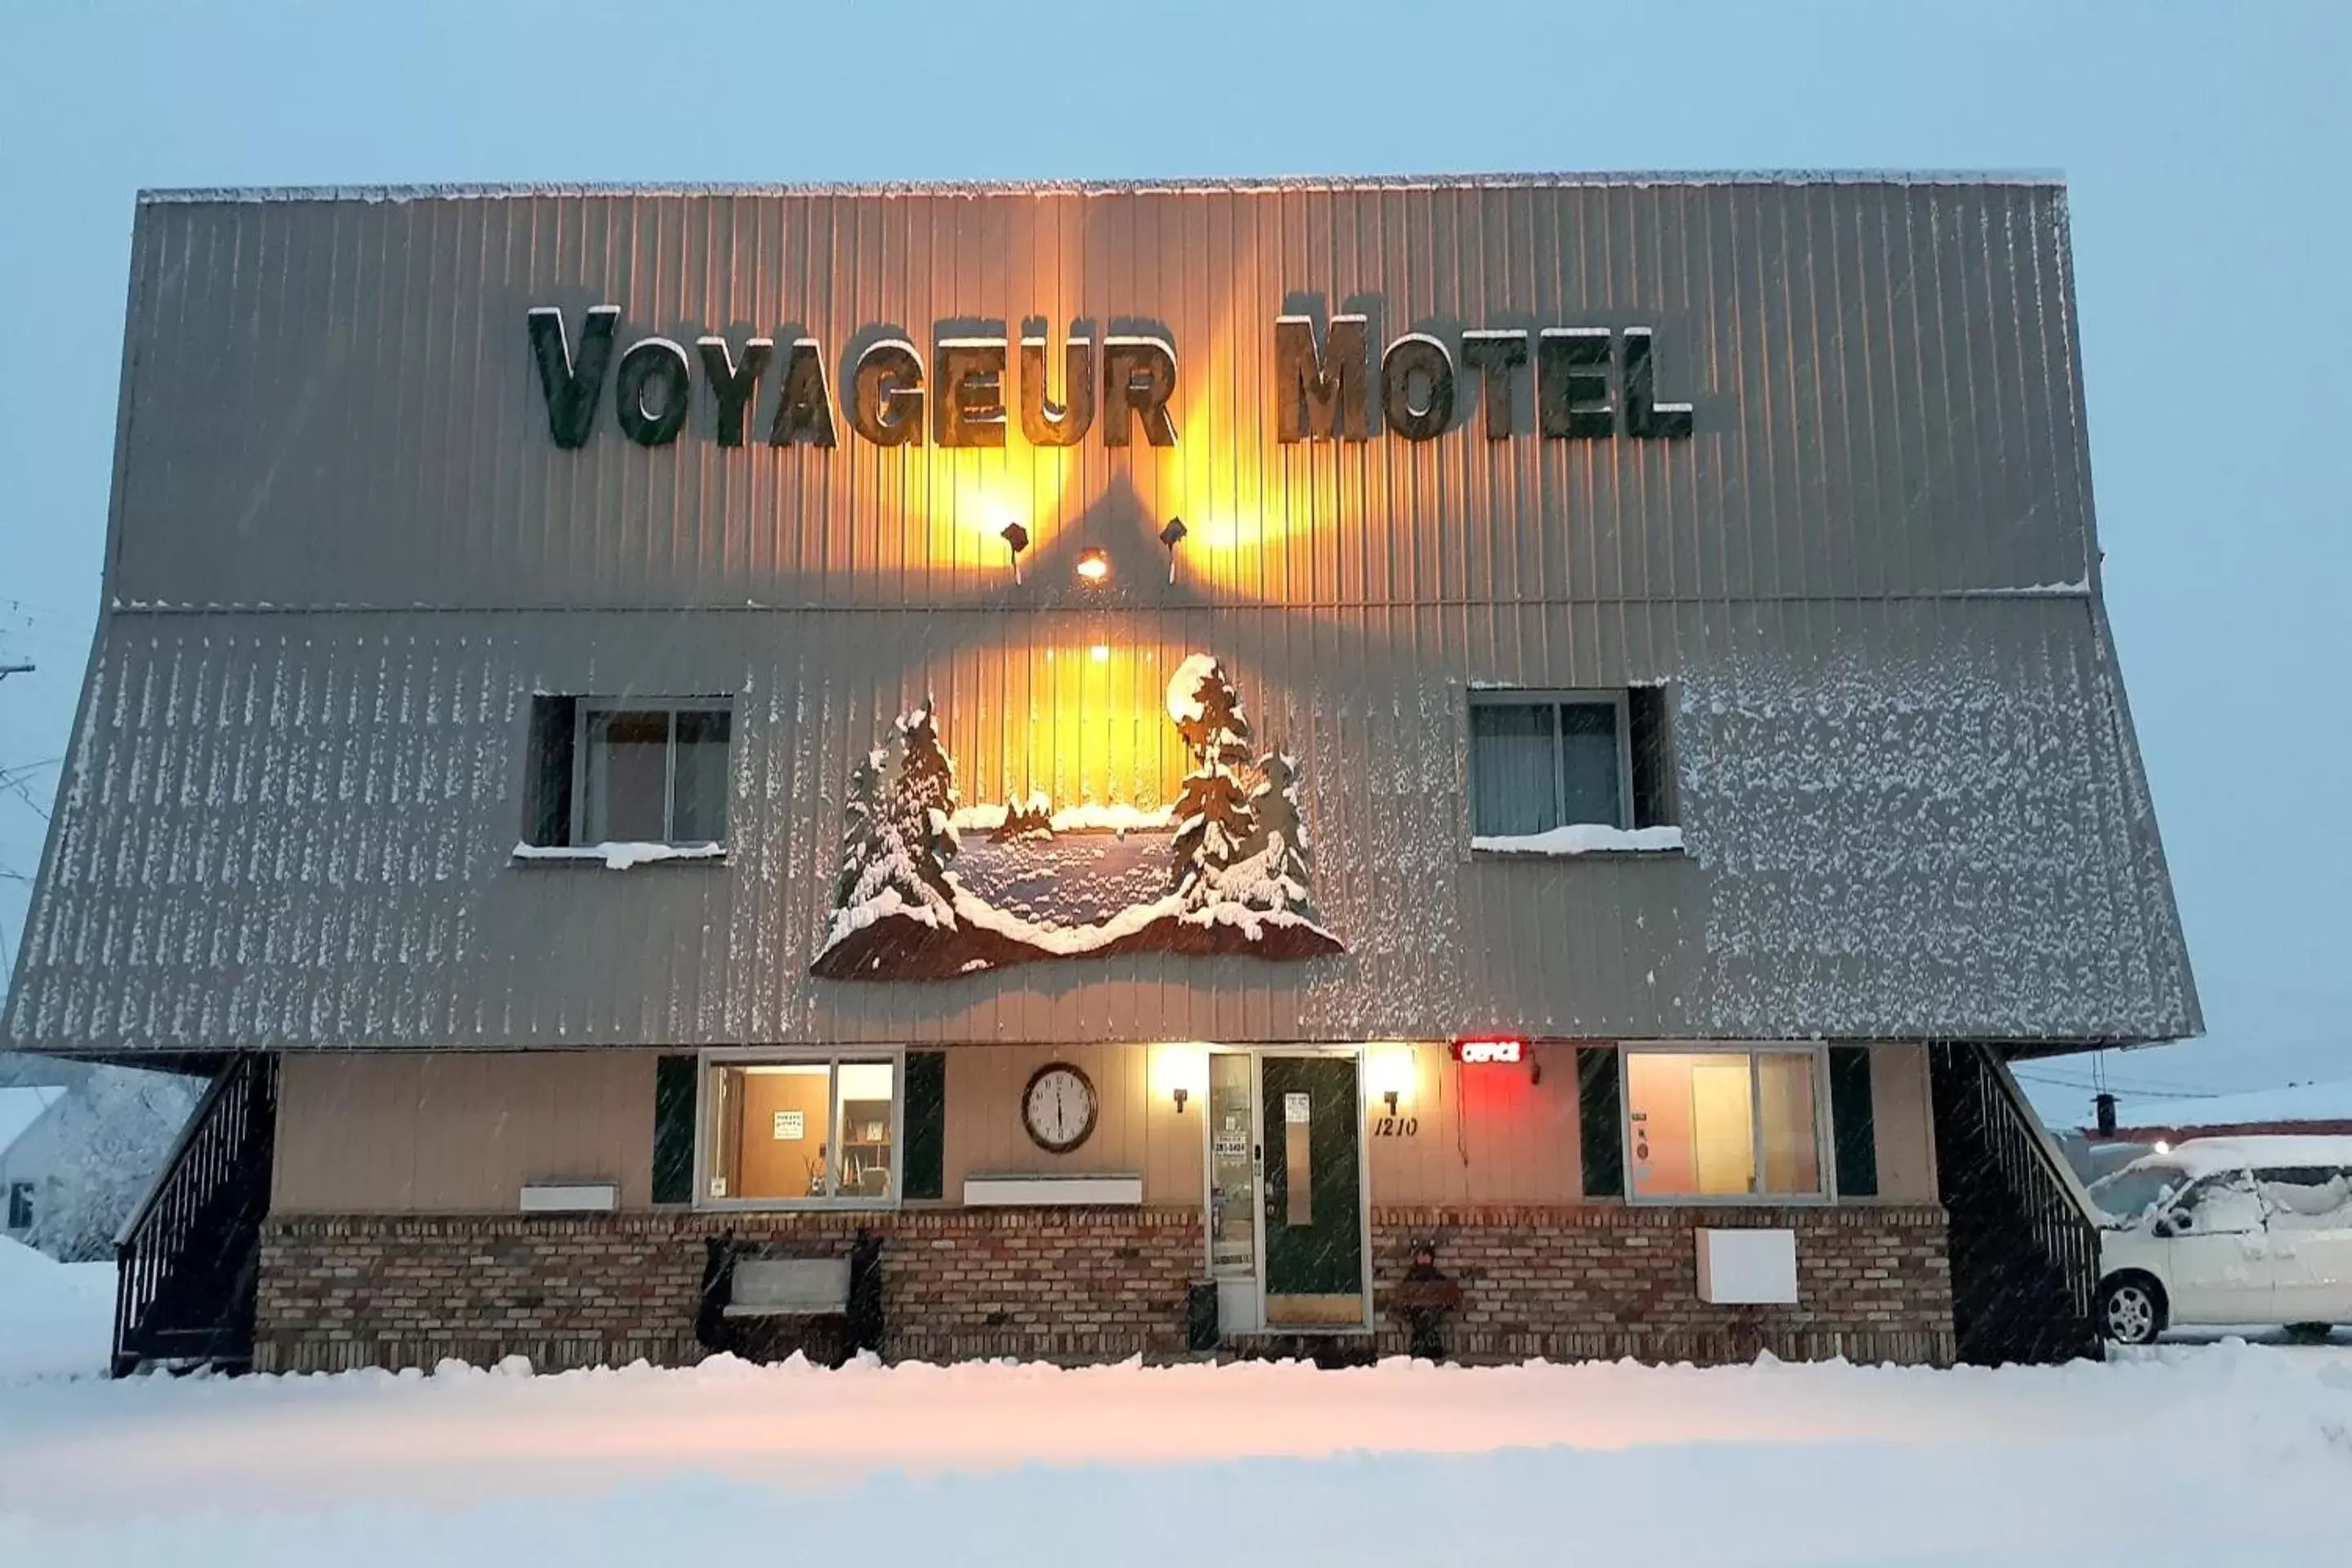 Property Building in Love Hotels Voyageur by OYO at International Falls MN